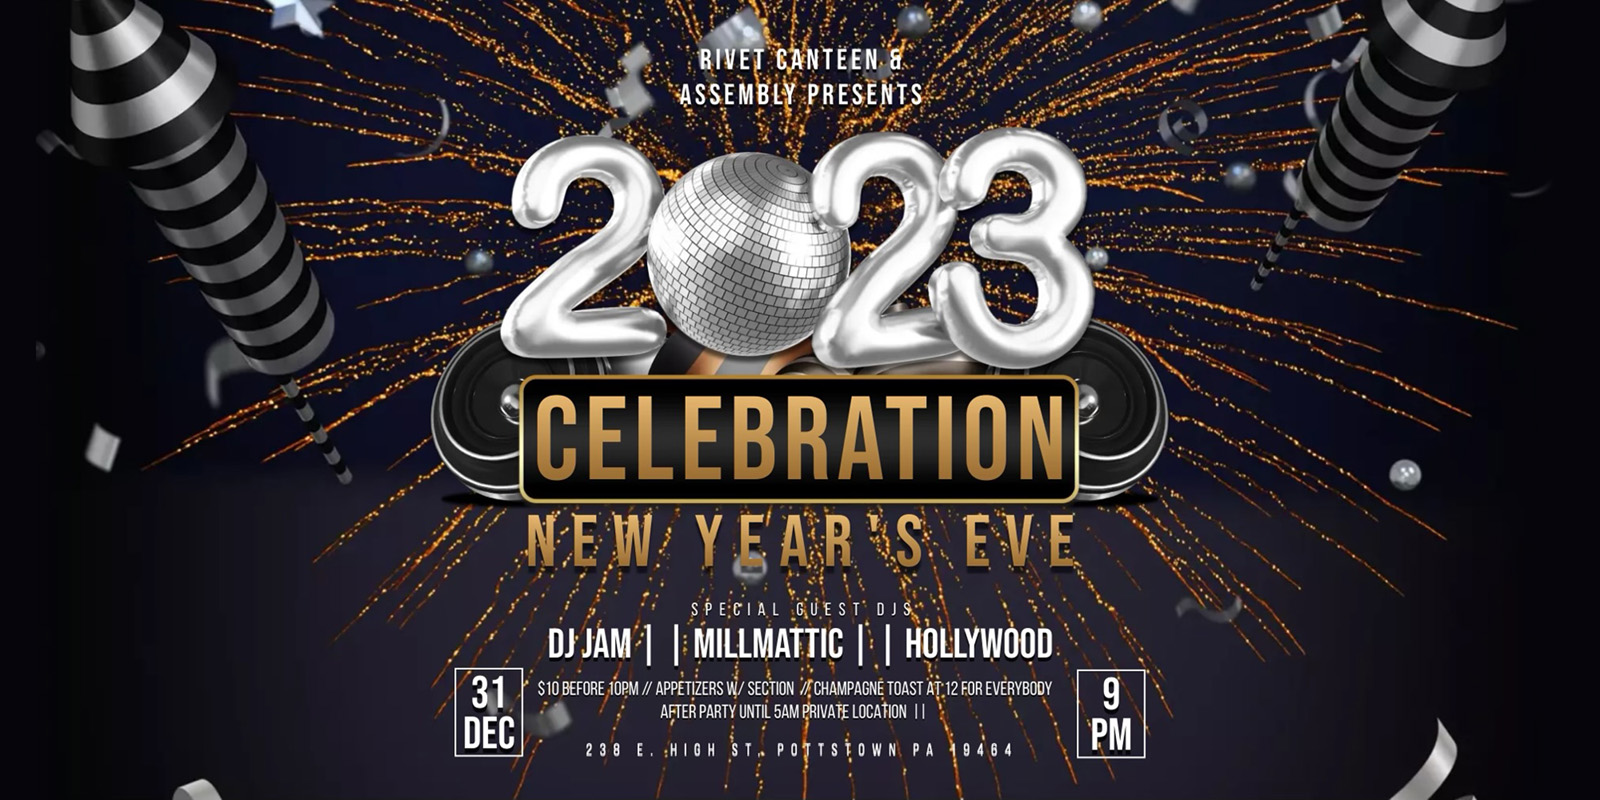 Join us at Rivet as we ring in the new year with an unforgettable party! Special guest DJs: DJ Jam, Millmattic, and Hollywood! 2023 New Year's Eve Celebration at Rivet: Canteen & Assembly on Saturday, December 31st.